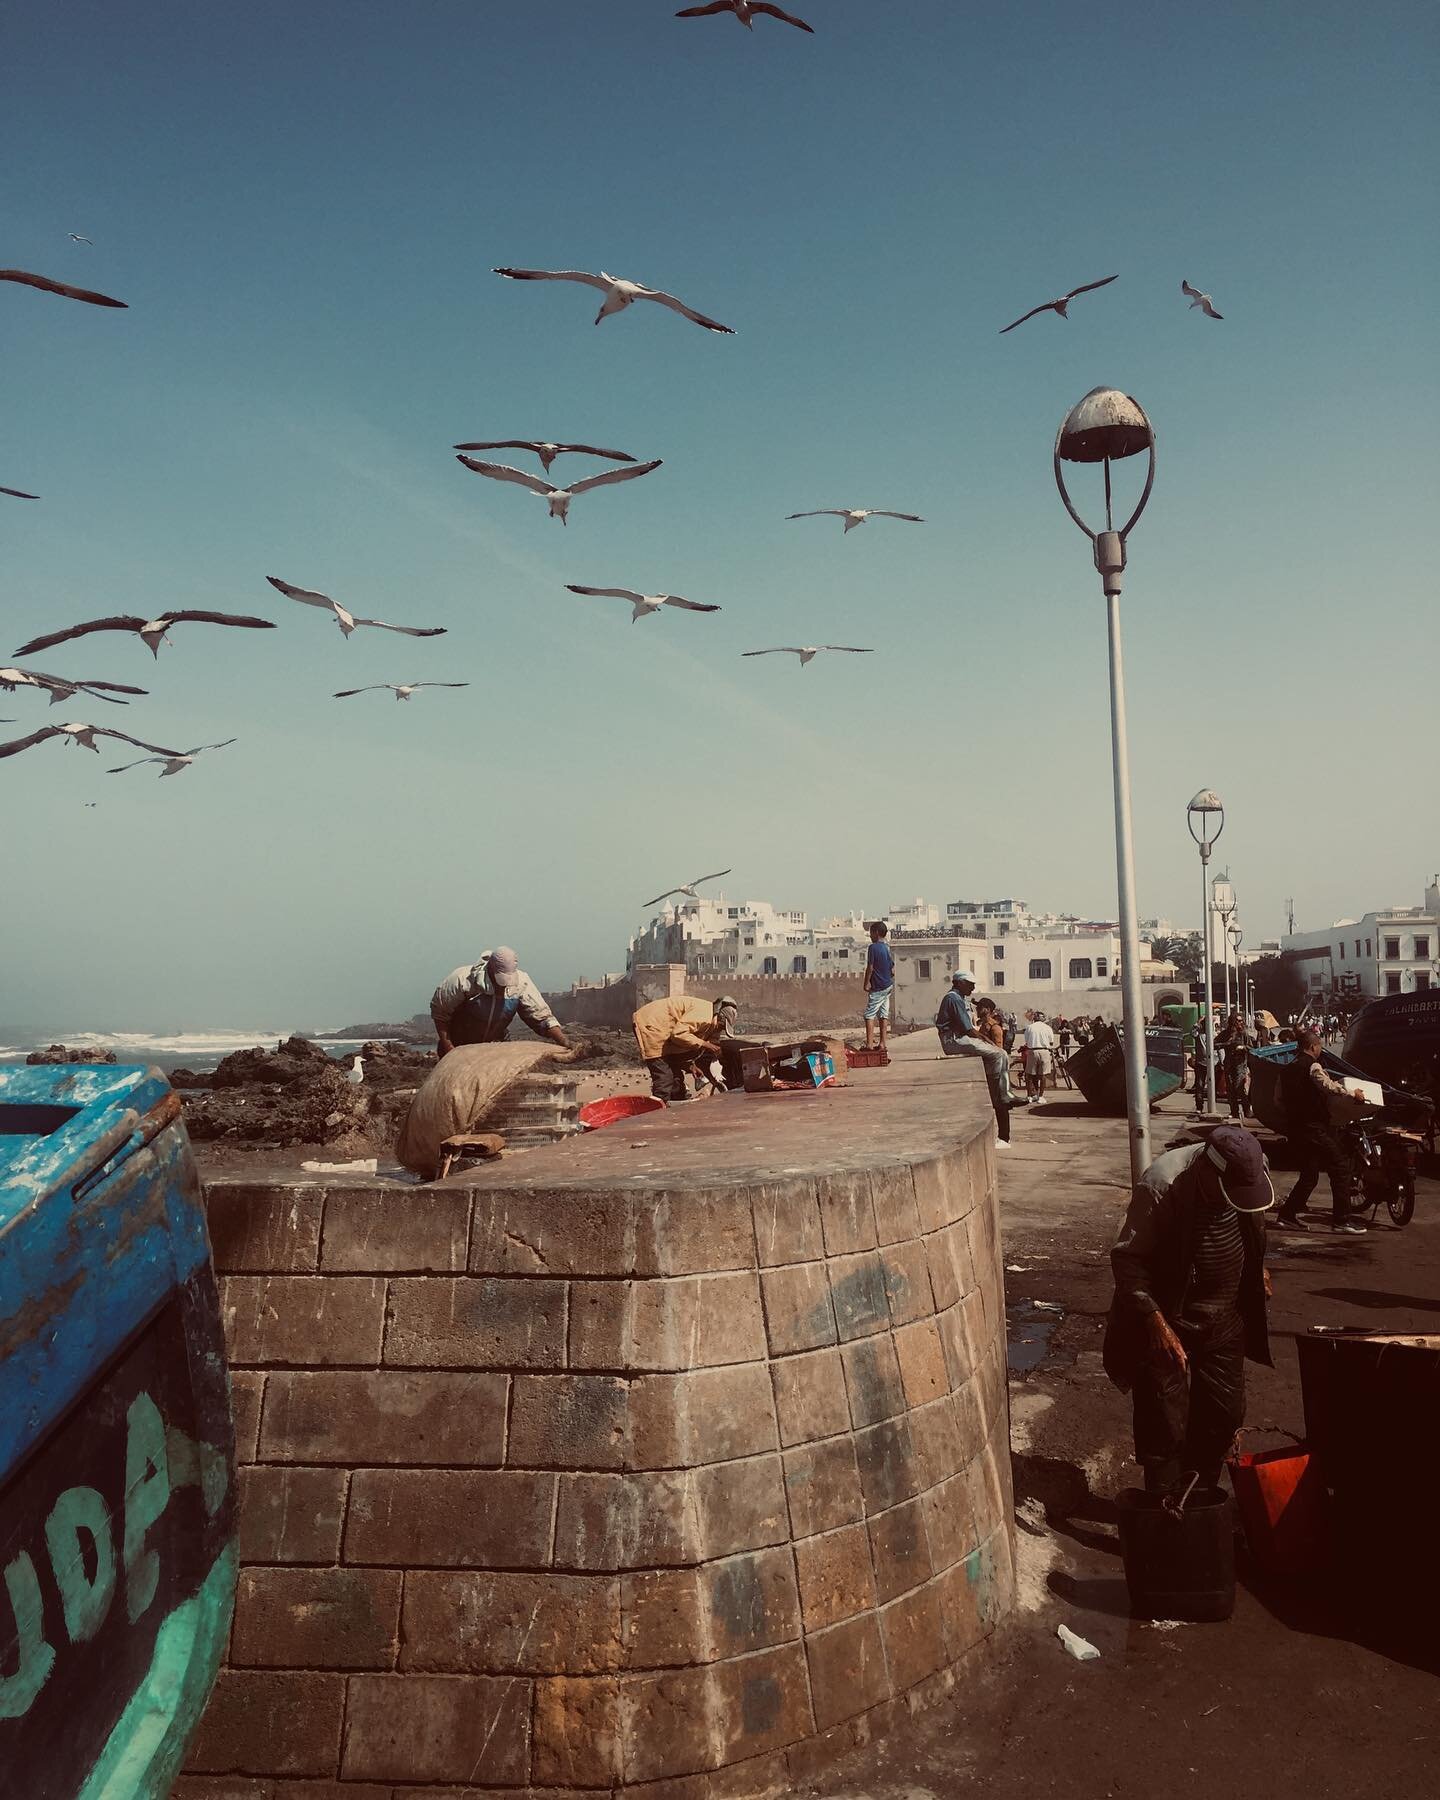 Essaouira located in the western coast of Morocco, an ancient walled city protected by 18th-century seafront ramparts called the Skala de la Kasbah, with a tumultuous past of Empire conquest and pirate invasions.

Also know for it&rsquo;s great surf 